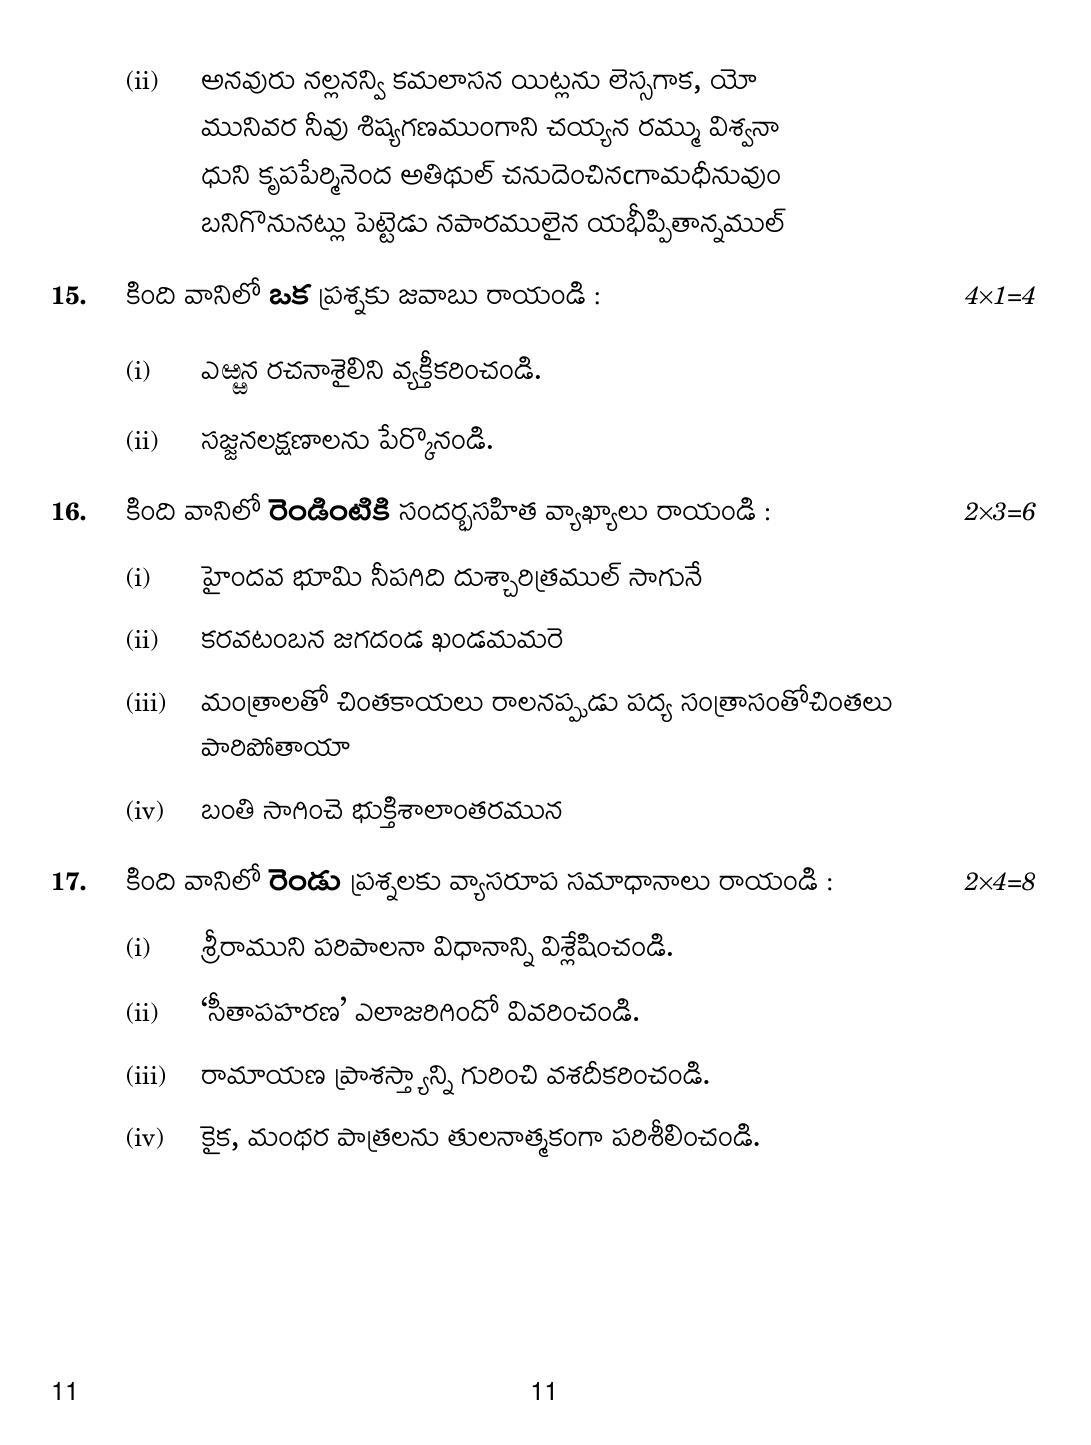 CBSE Class 10 11 Telug 2019 Question Paper - Page 11